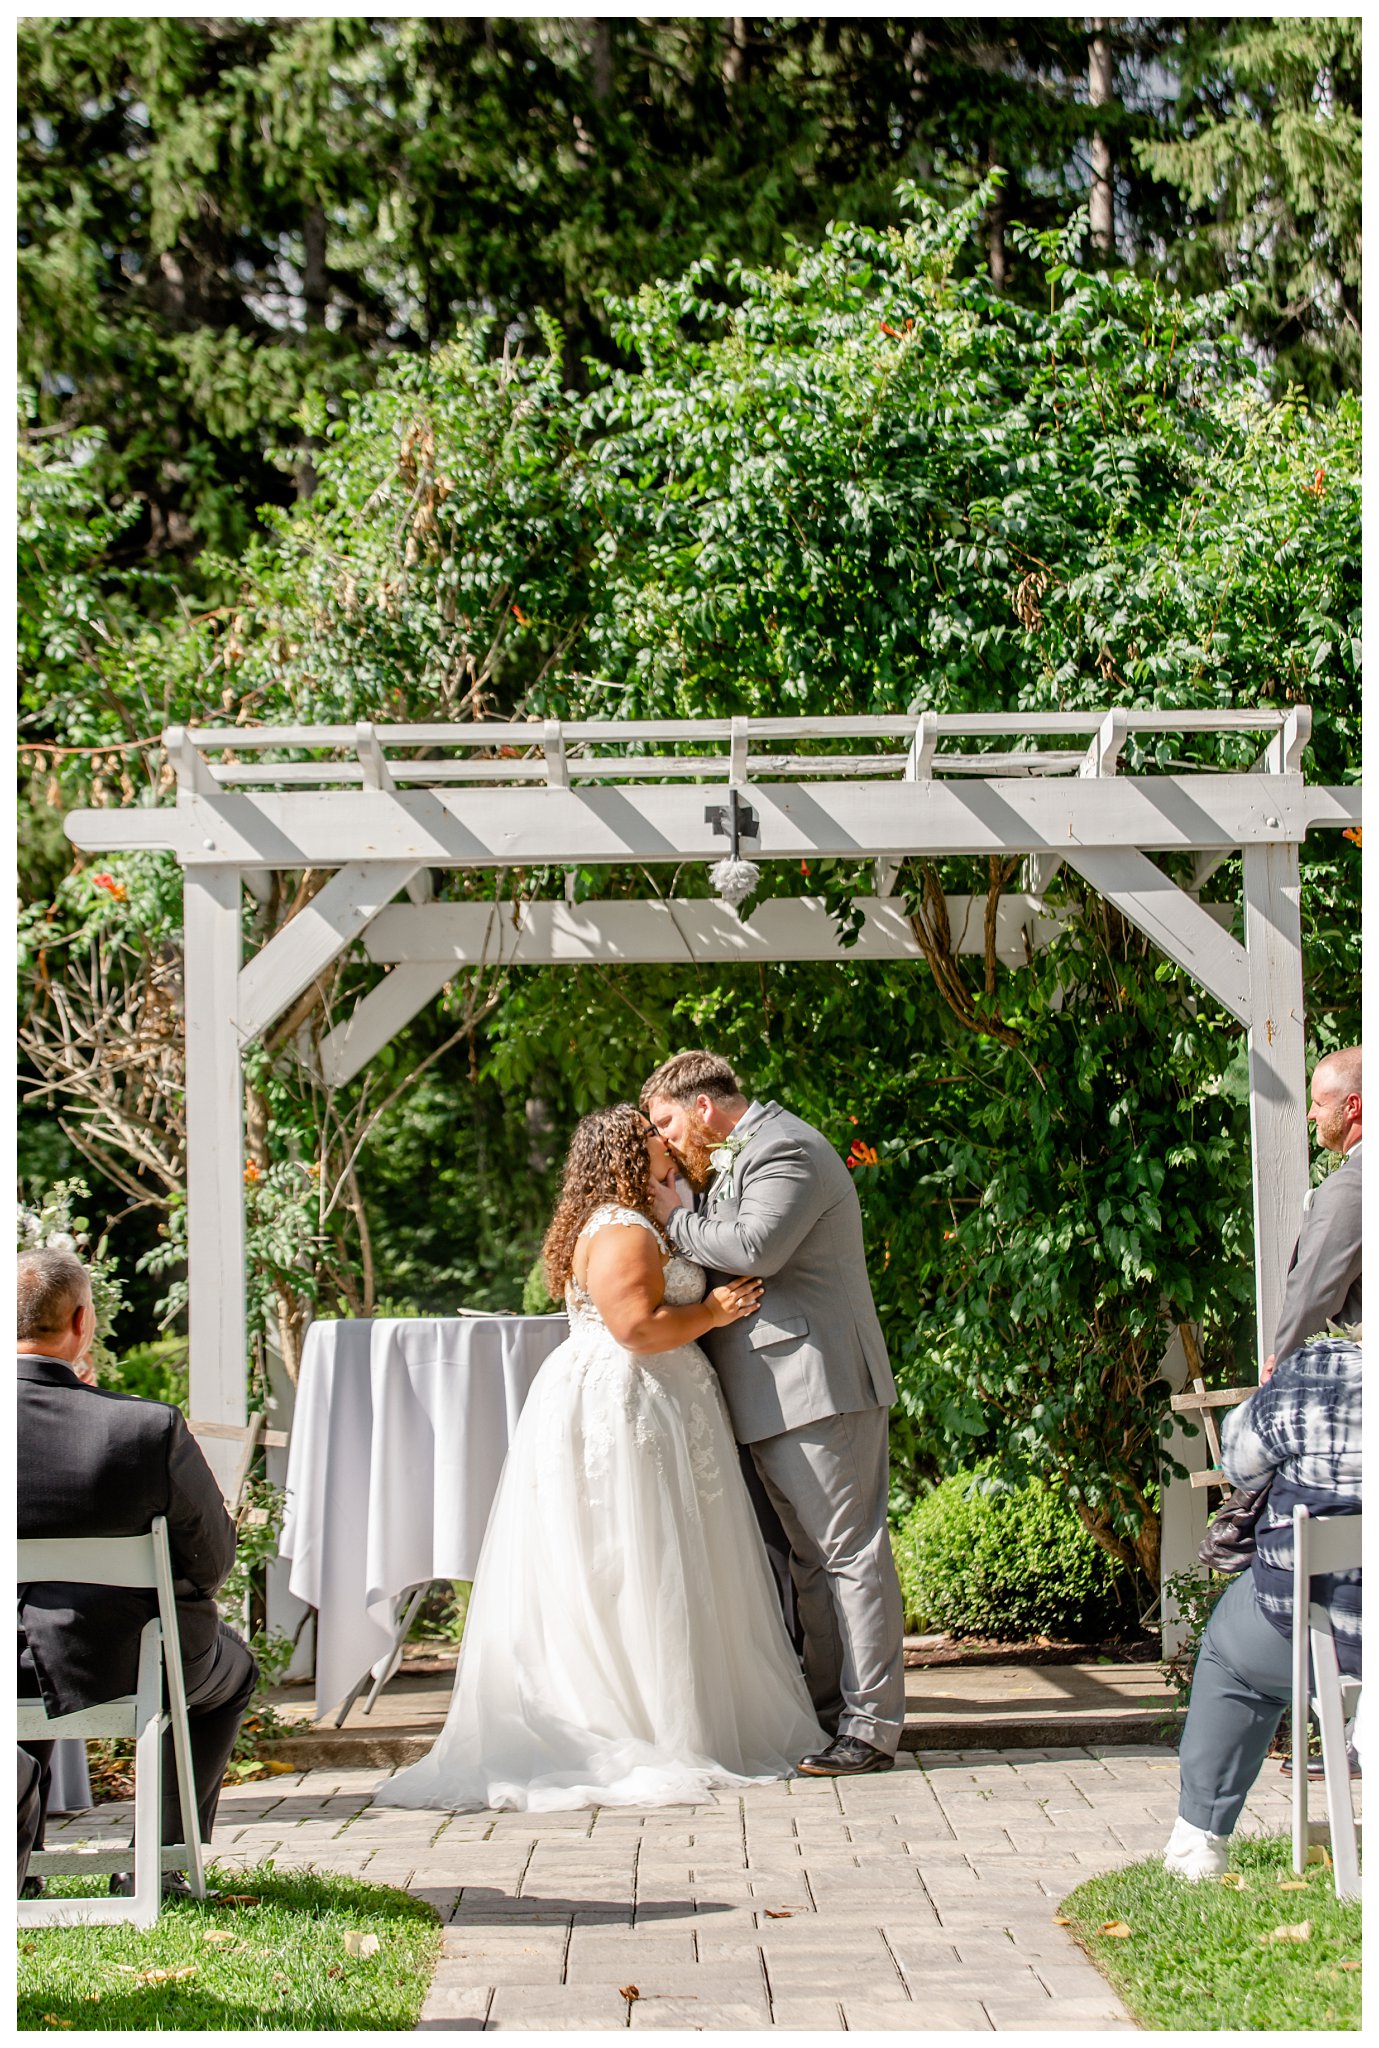 Dibble's Inn Apply Orchard Wedding. Emily and Don. Summer 2020. Joanna Young Photography_0029.jpg